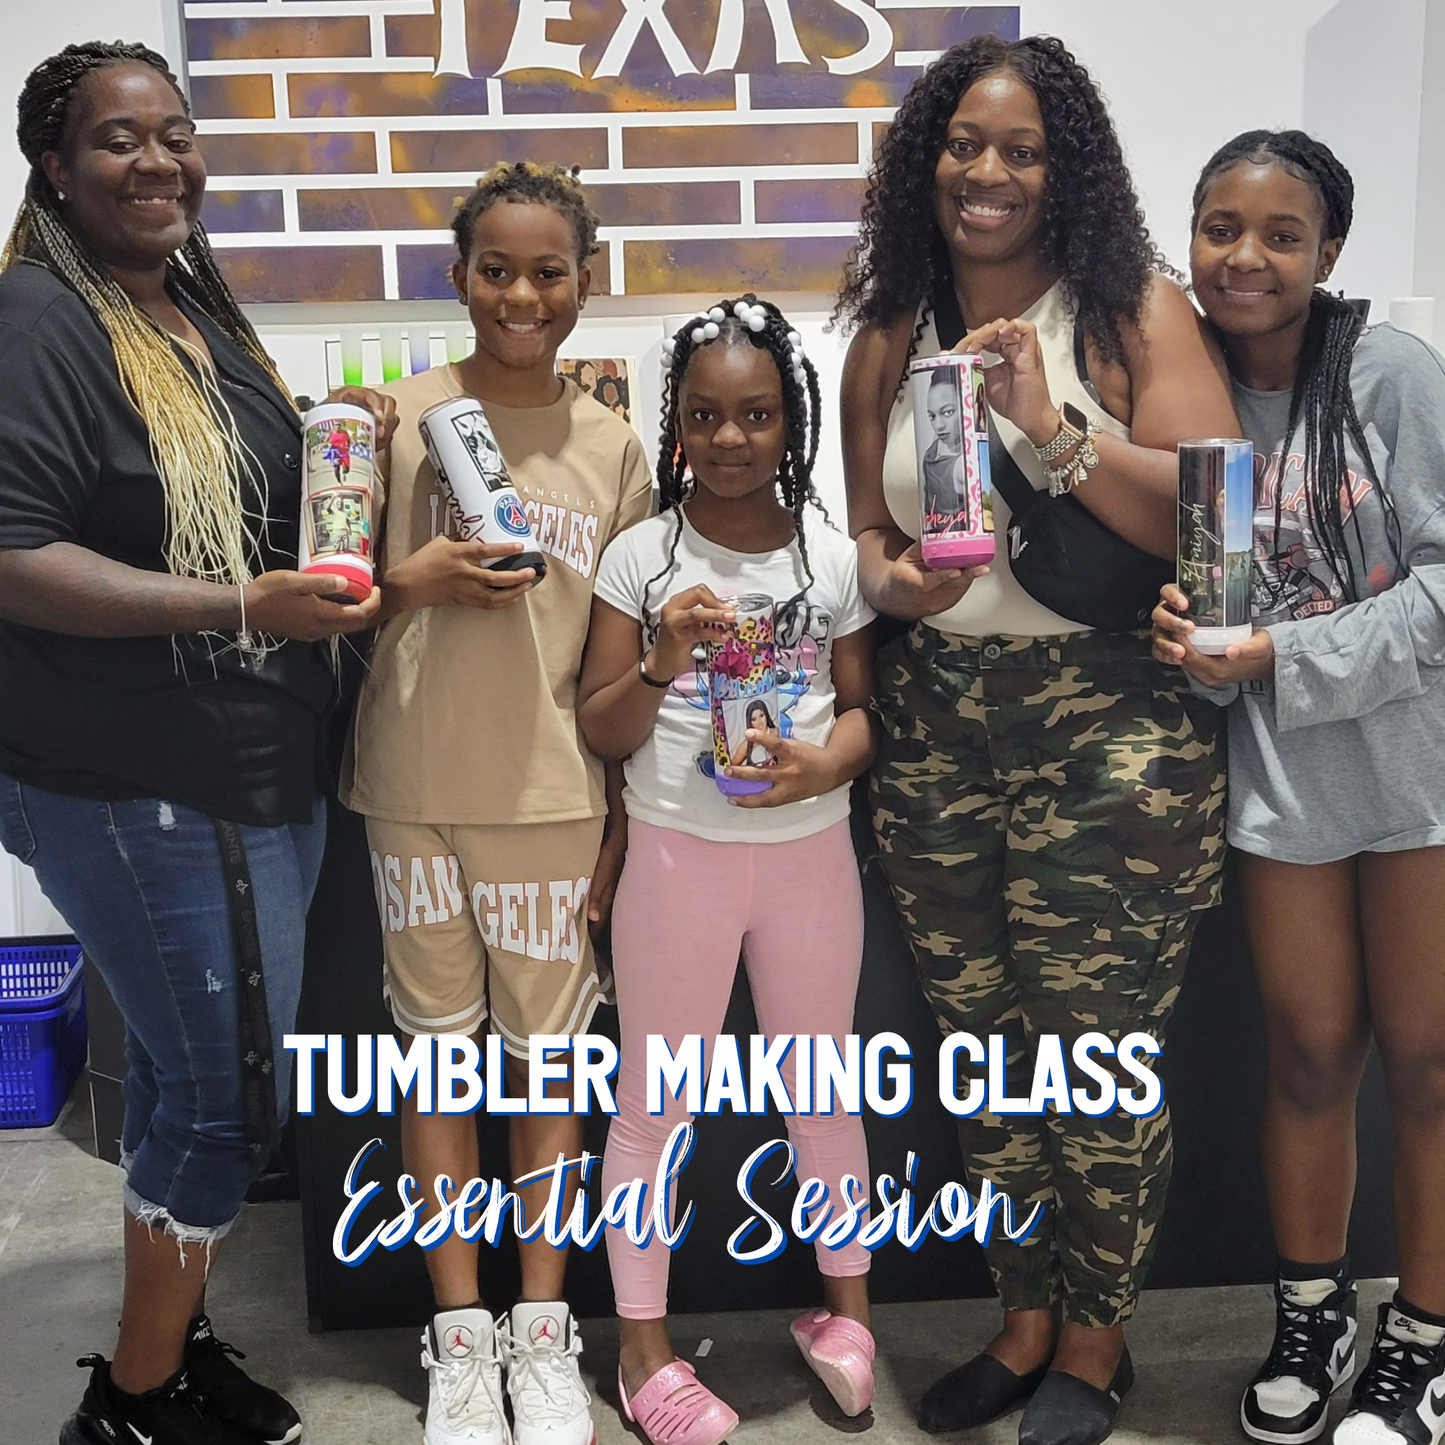 Tumbler Making Class - Essential Session